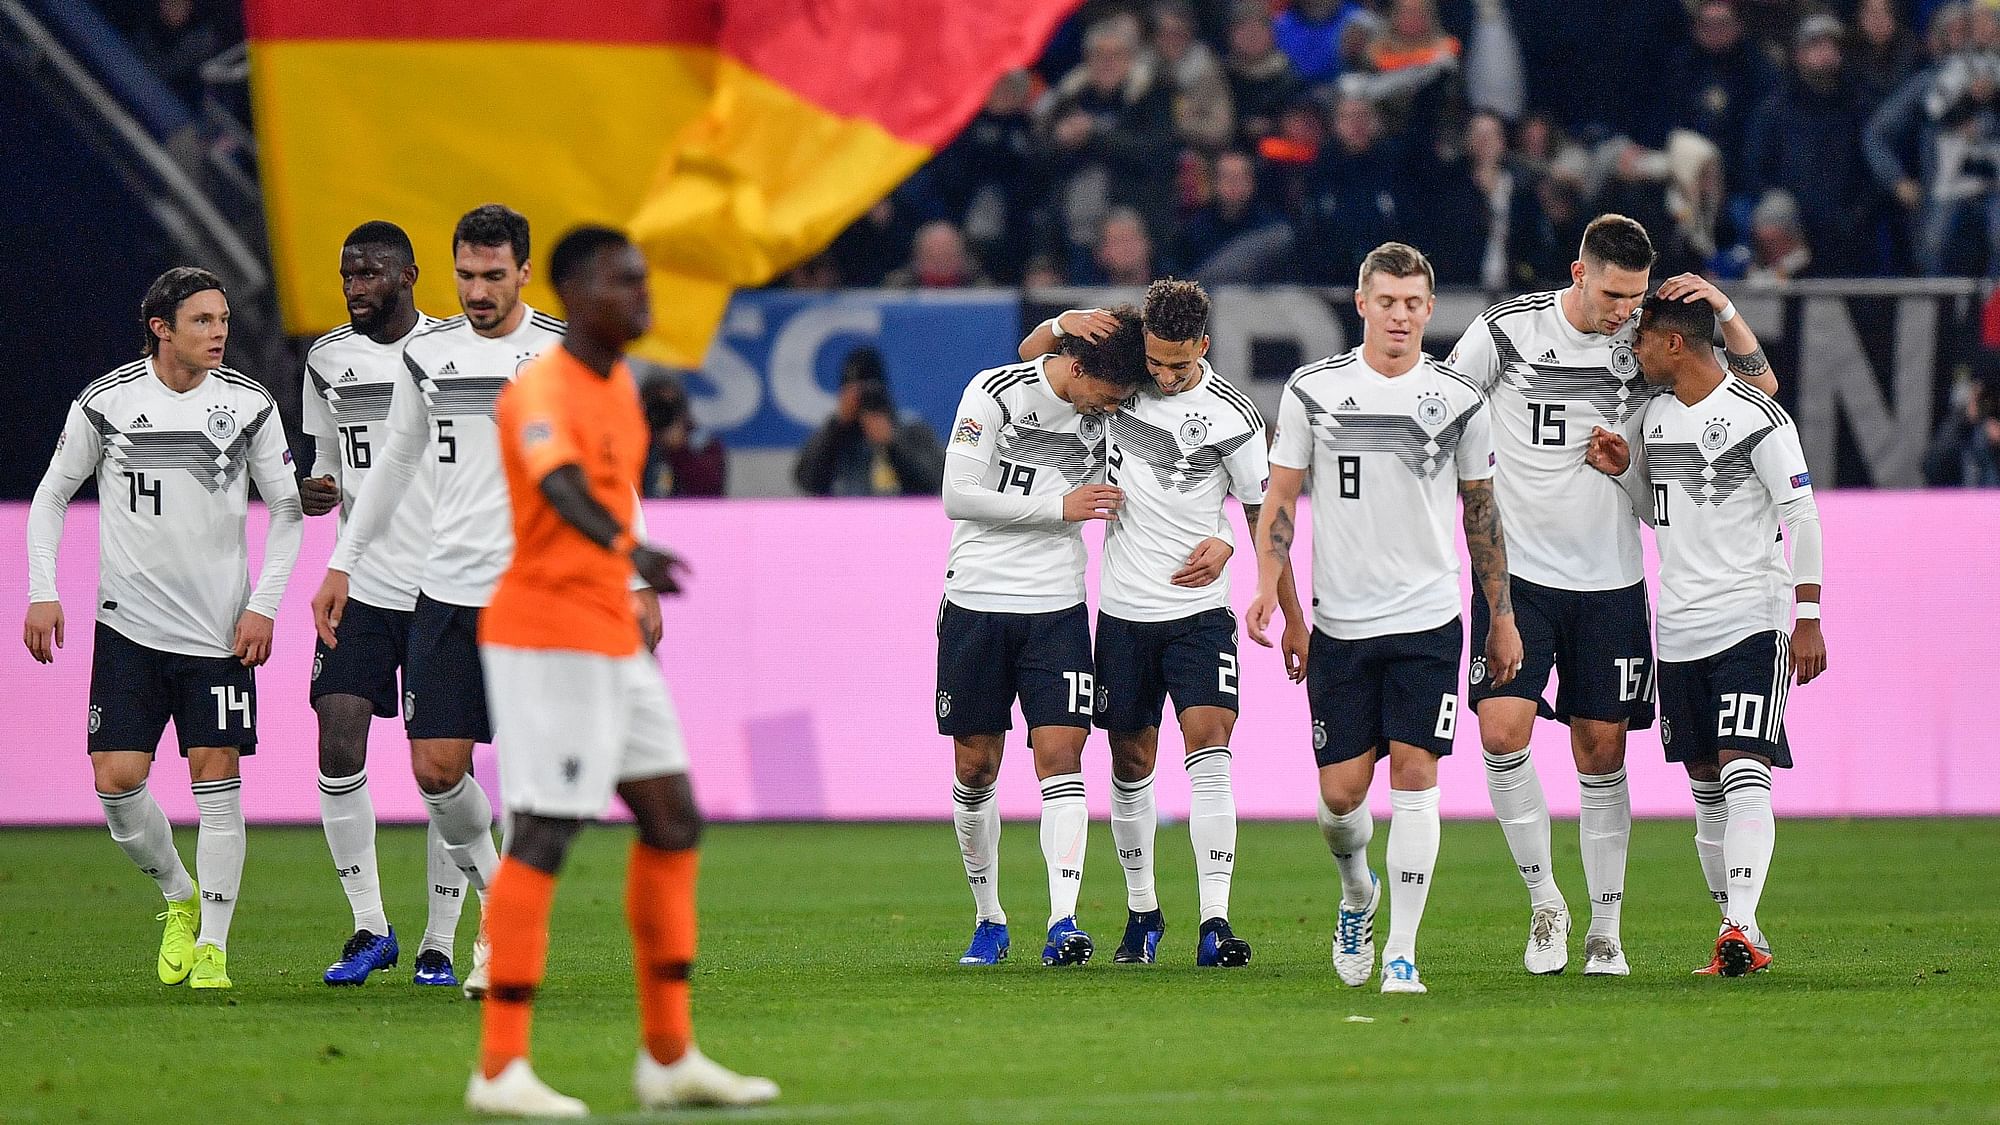 Netherlands entered the UEFA Nations League finals after ending Germany’s nightmare year with yet more disappointment in a 2-2 draw on Monday.